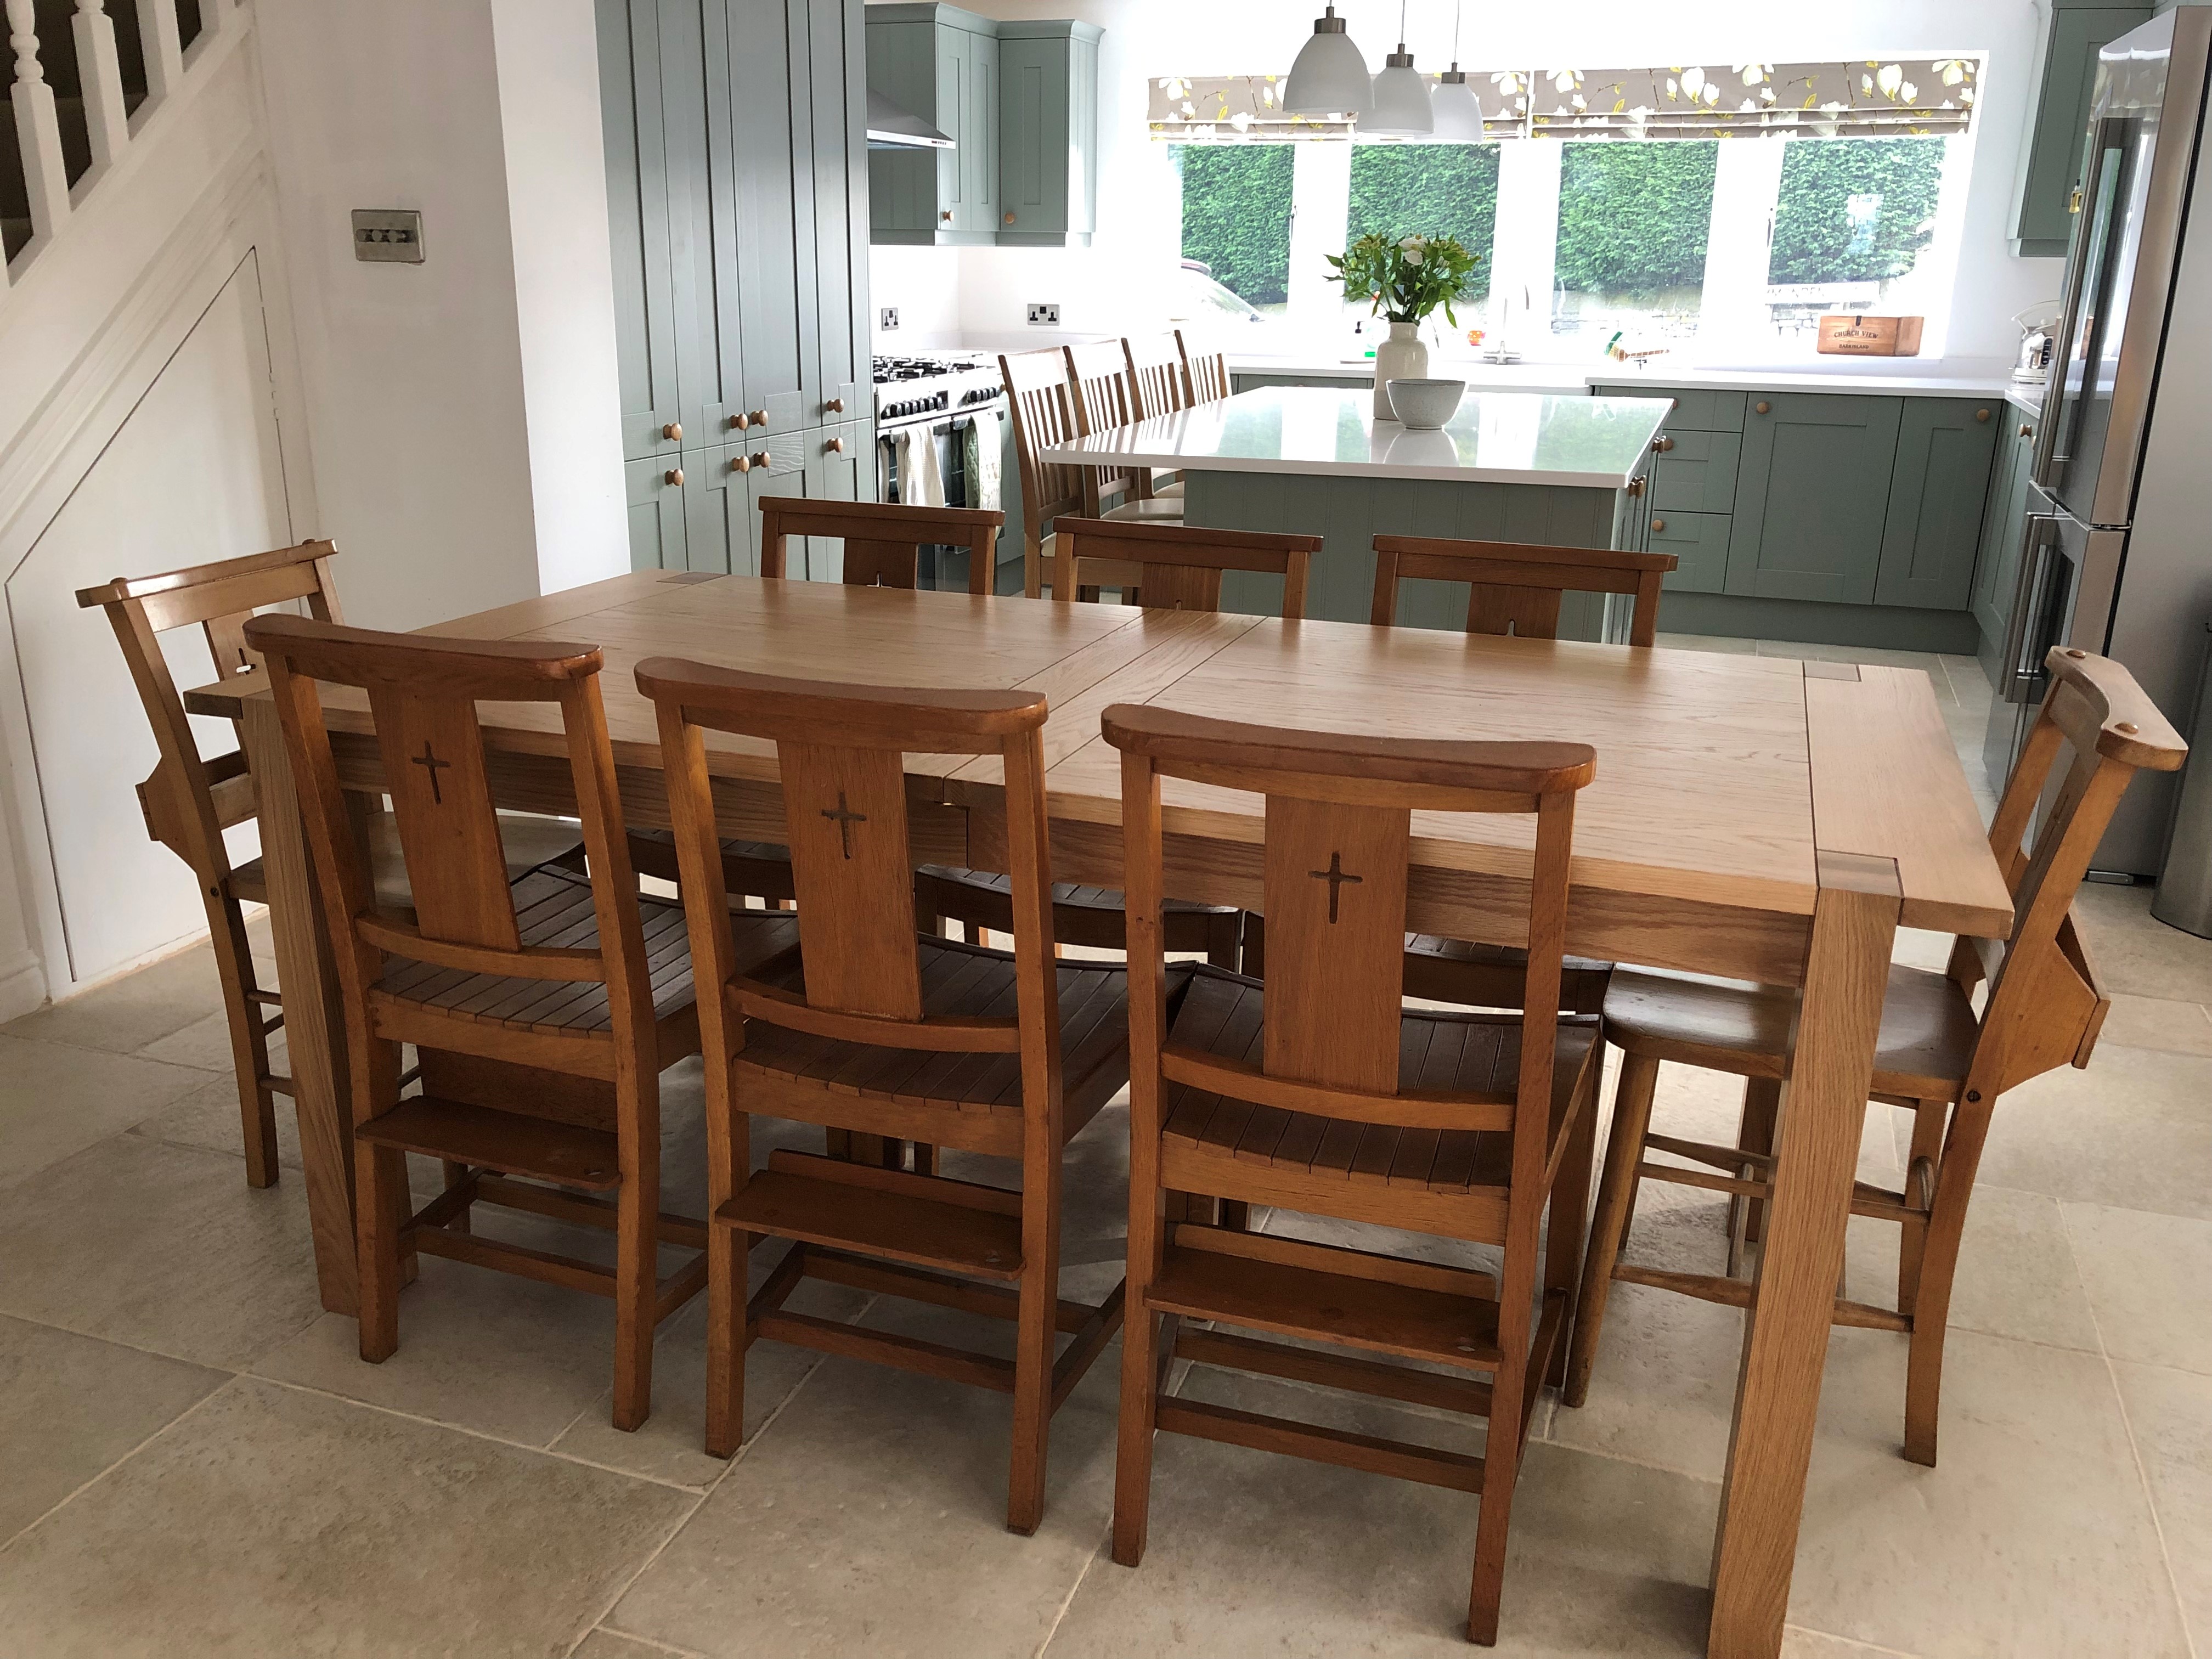 Antique Church Chairs Fitted in Traditional and modern Kitchens. Buy antique Church chairs from UKAA online. Genuine Victorian old wooden Chapel chairs